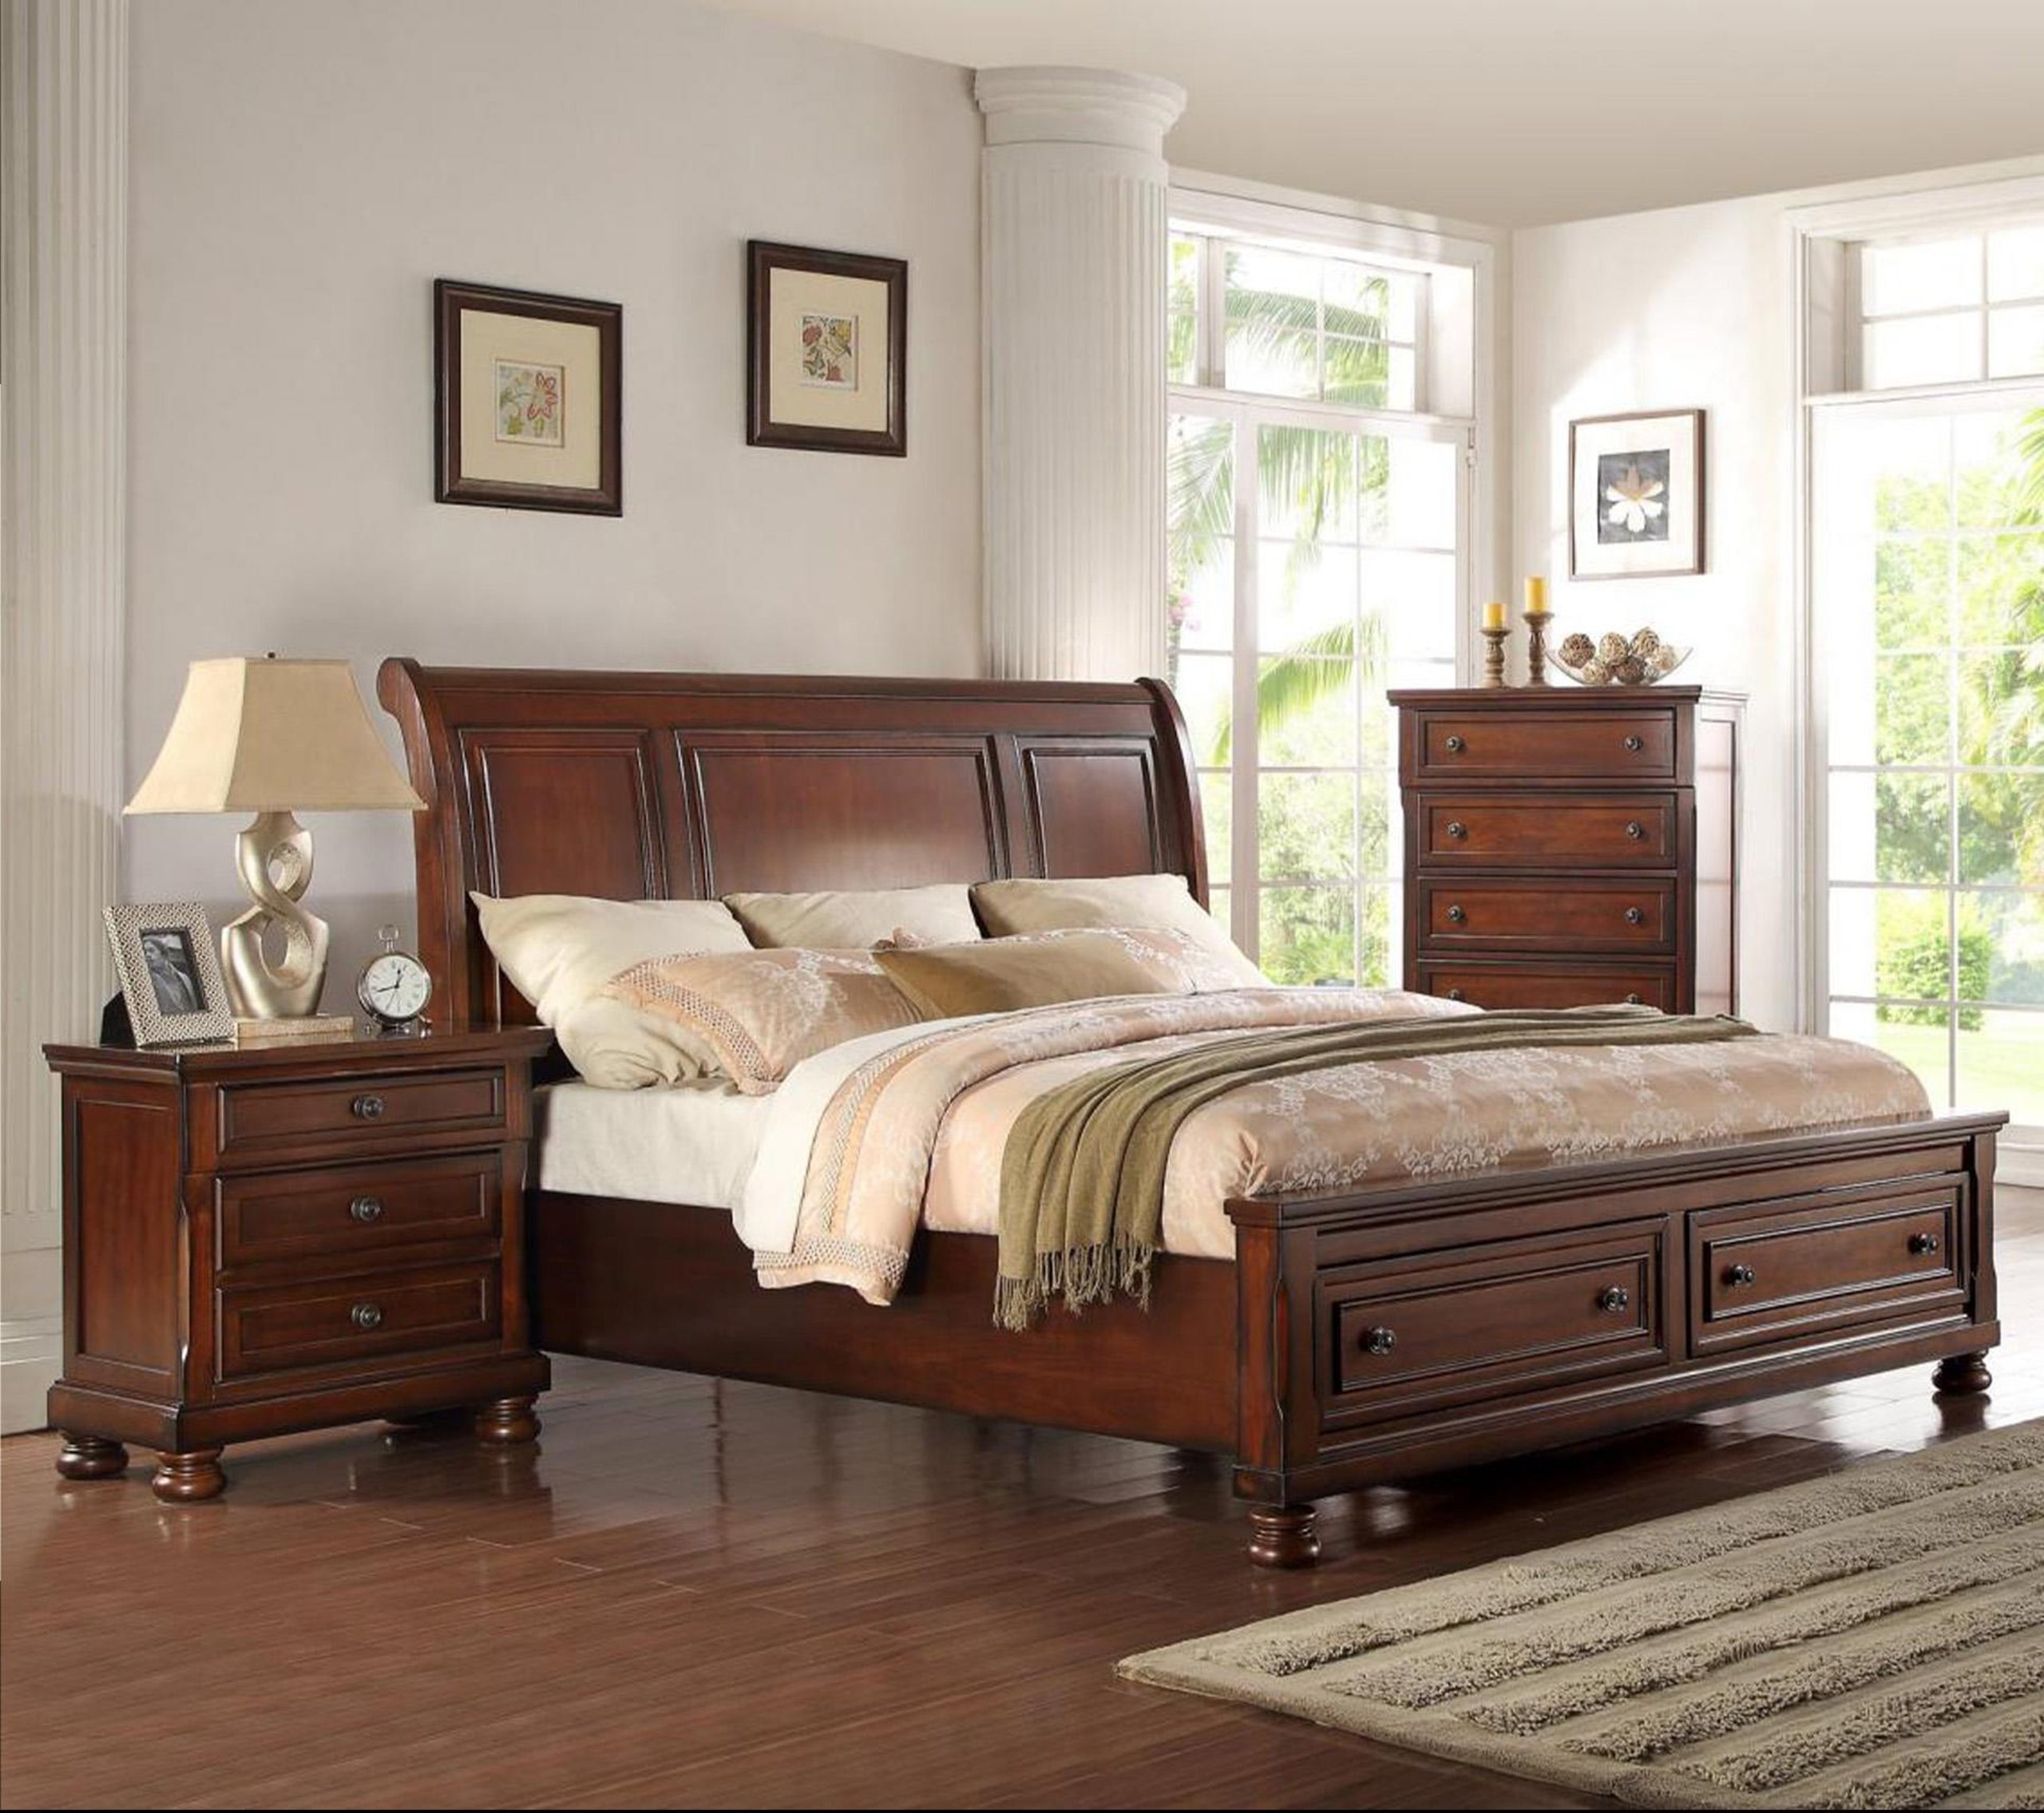 Contemporary Queen Beds for sale – buy online on NY Furniture Outlet